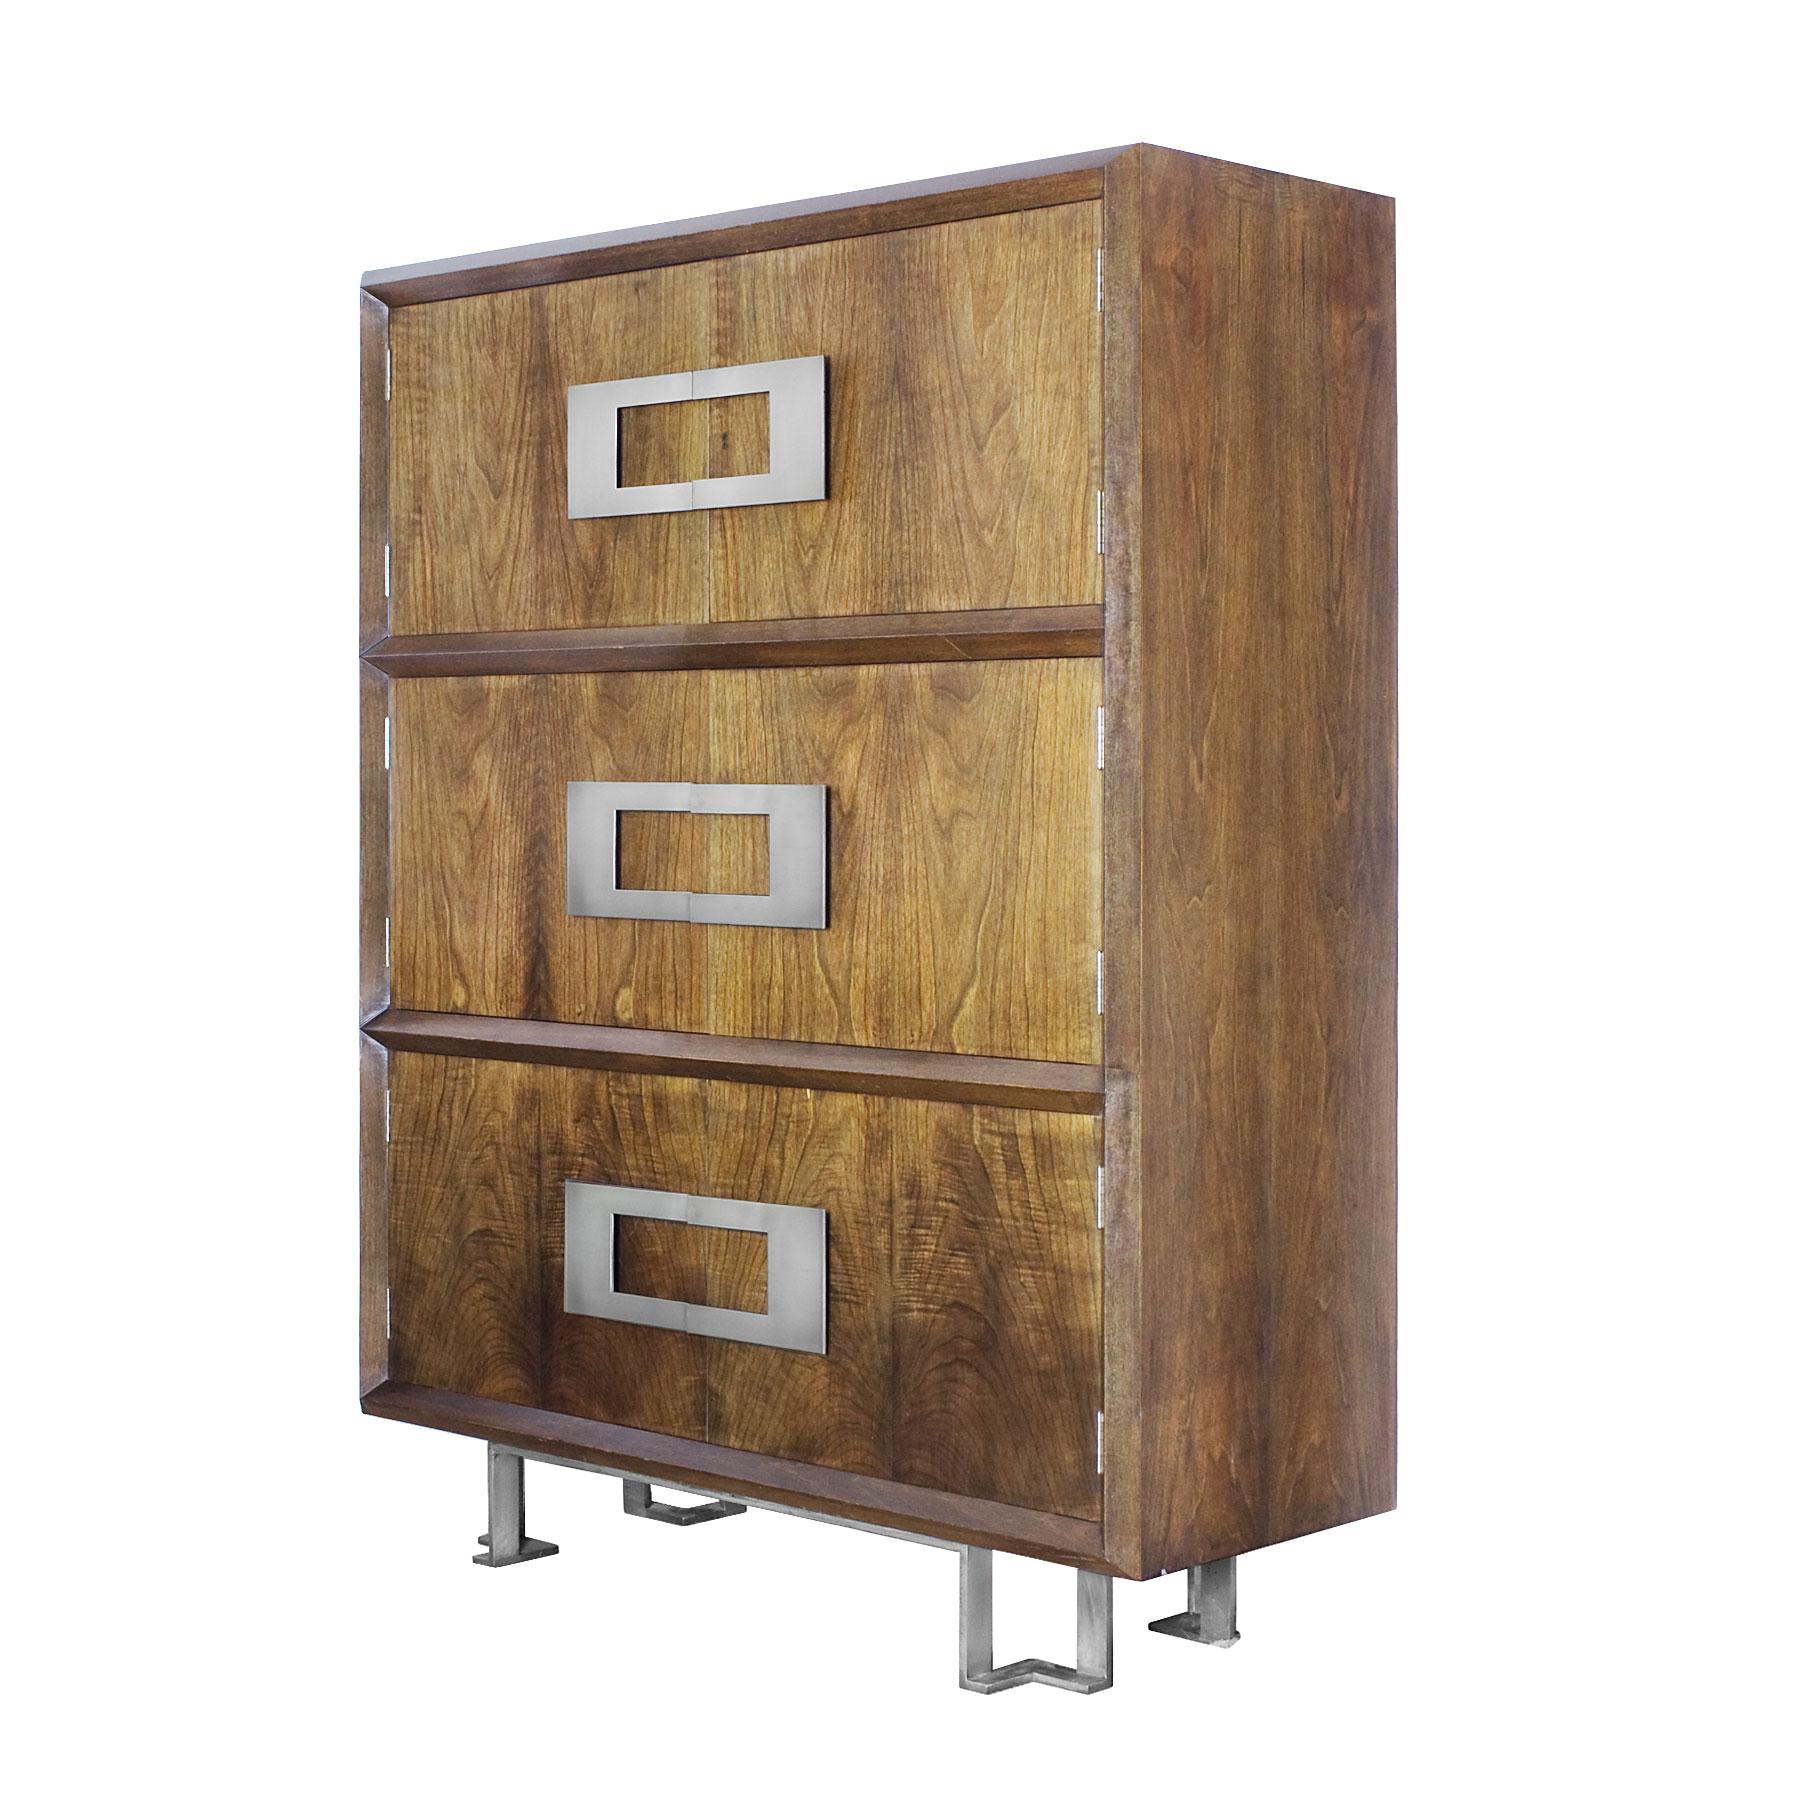 Important dry bar with six doors, stained and French polished walnut veneer. Red lacquer inside with small sliding tray and four drawers. Nickel plated solid brass handles and feet.
Design: Jordi Vilanova

Spain, Barcelona, circa 1970.